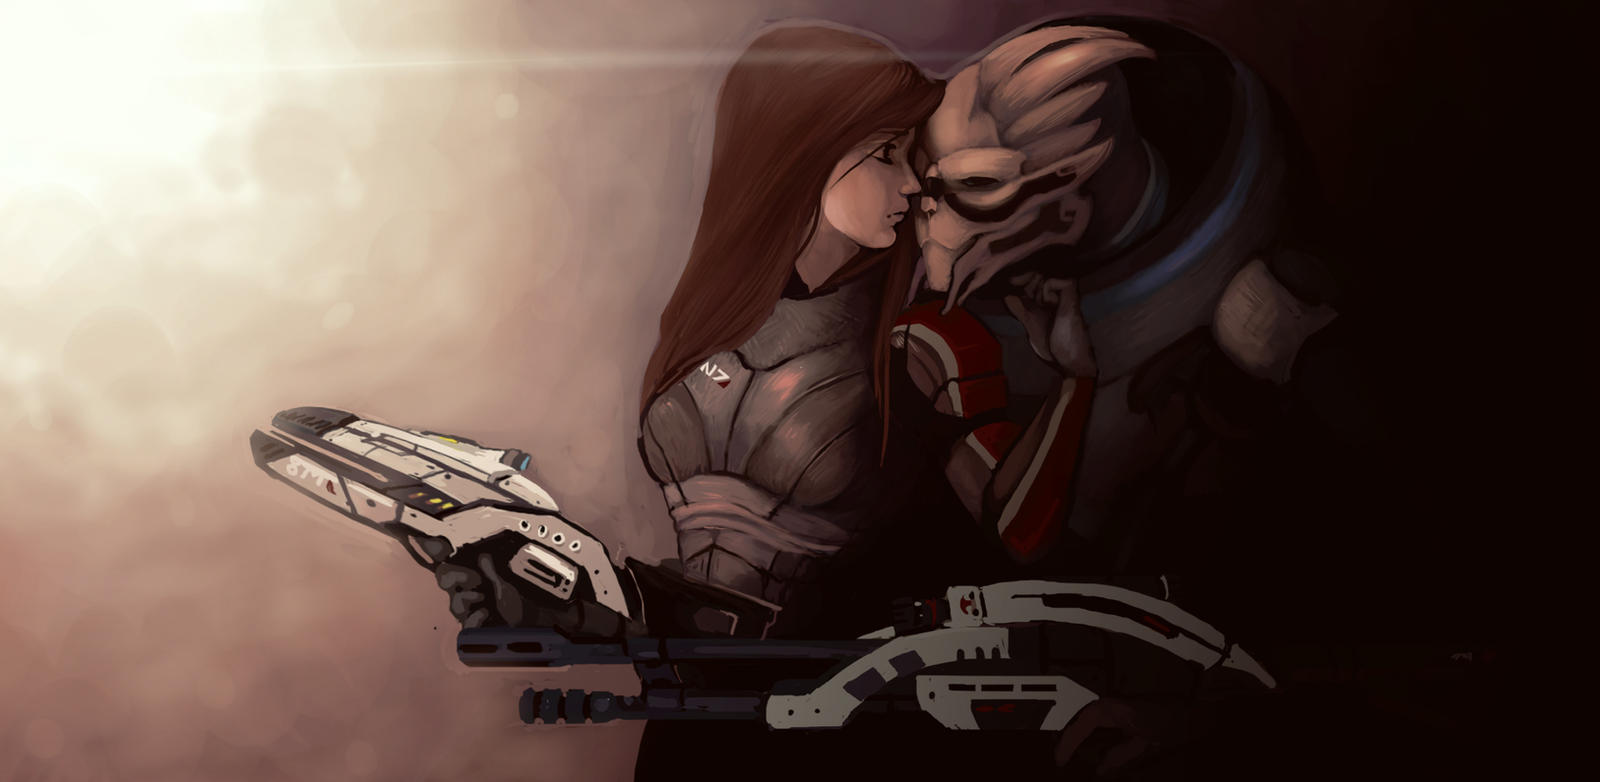 shepard_and_garrus_by_aleigh01-d54i7hs.jpg